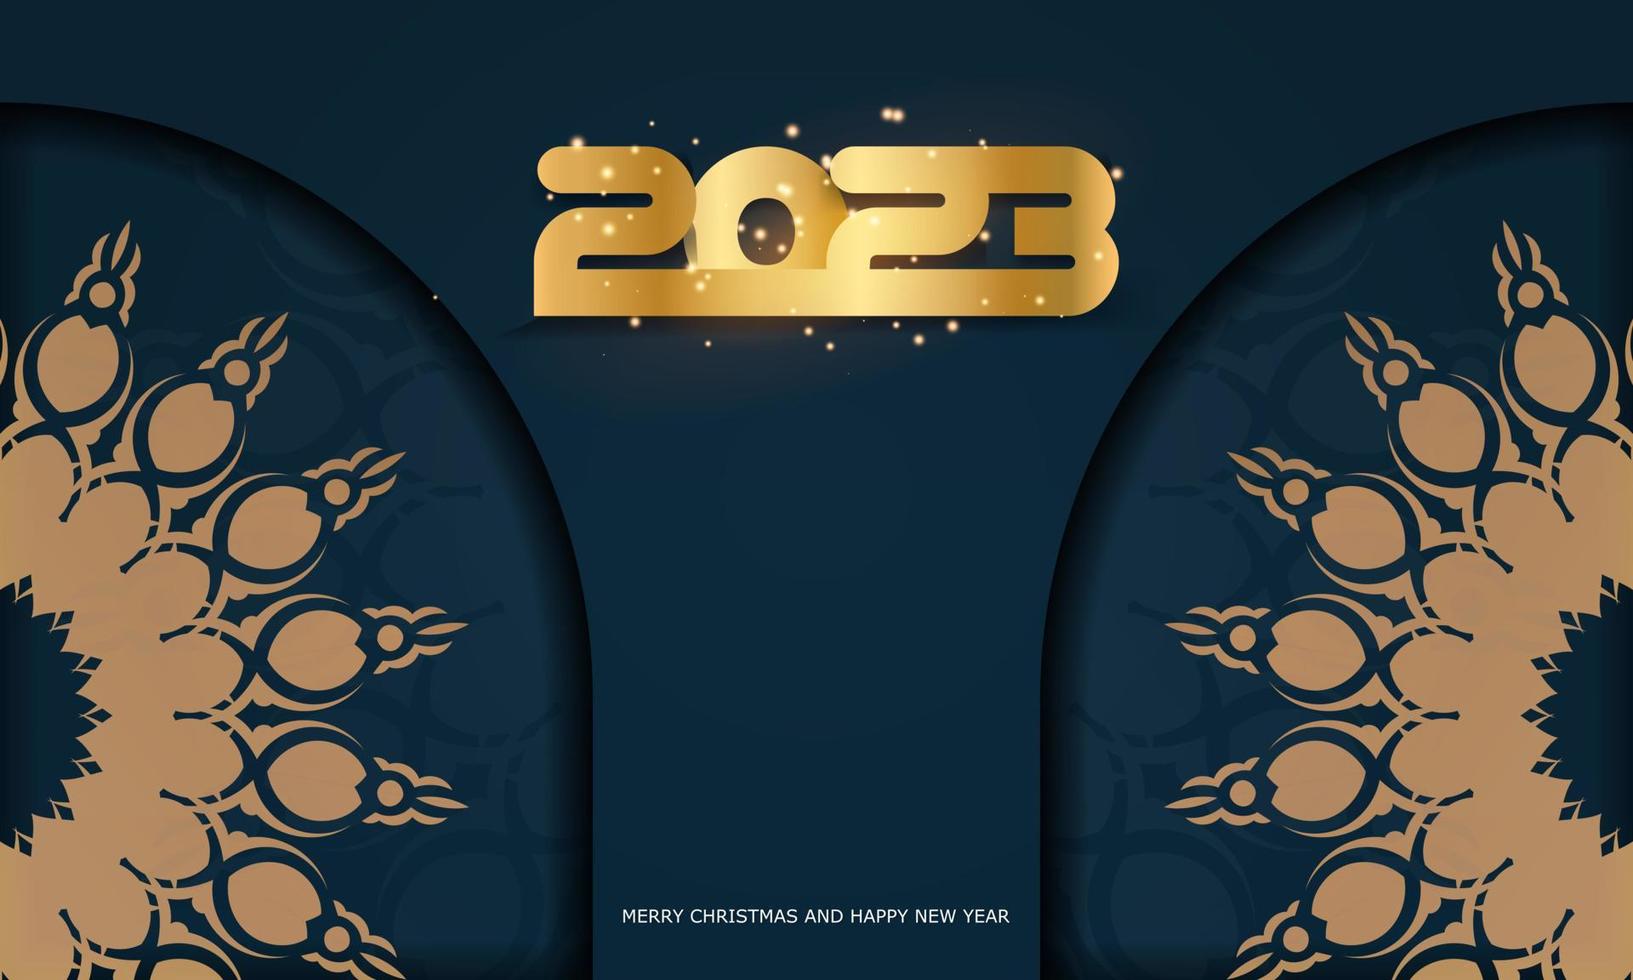 2023 happy new year greeting poster. Blue and gold color. vector